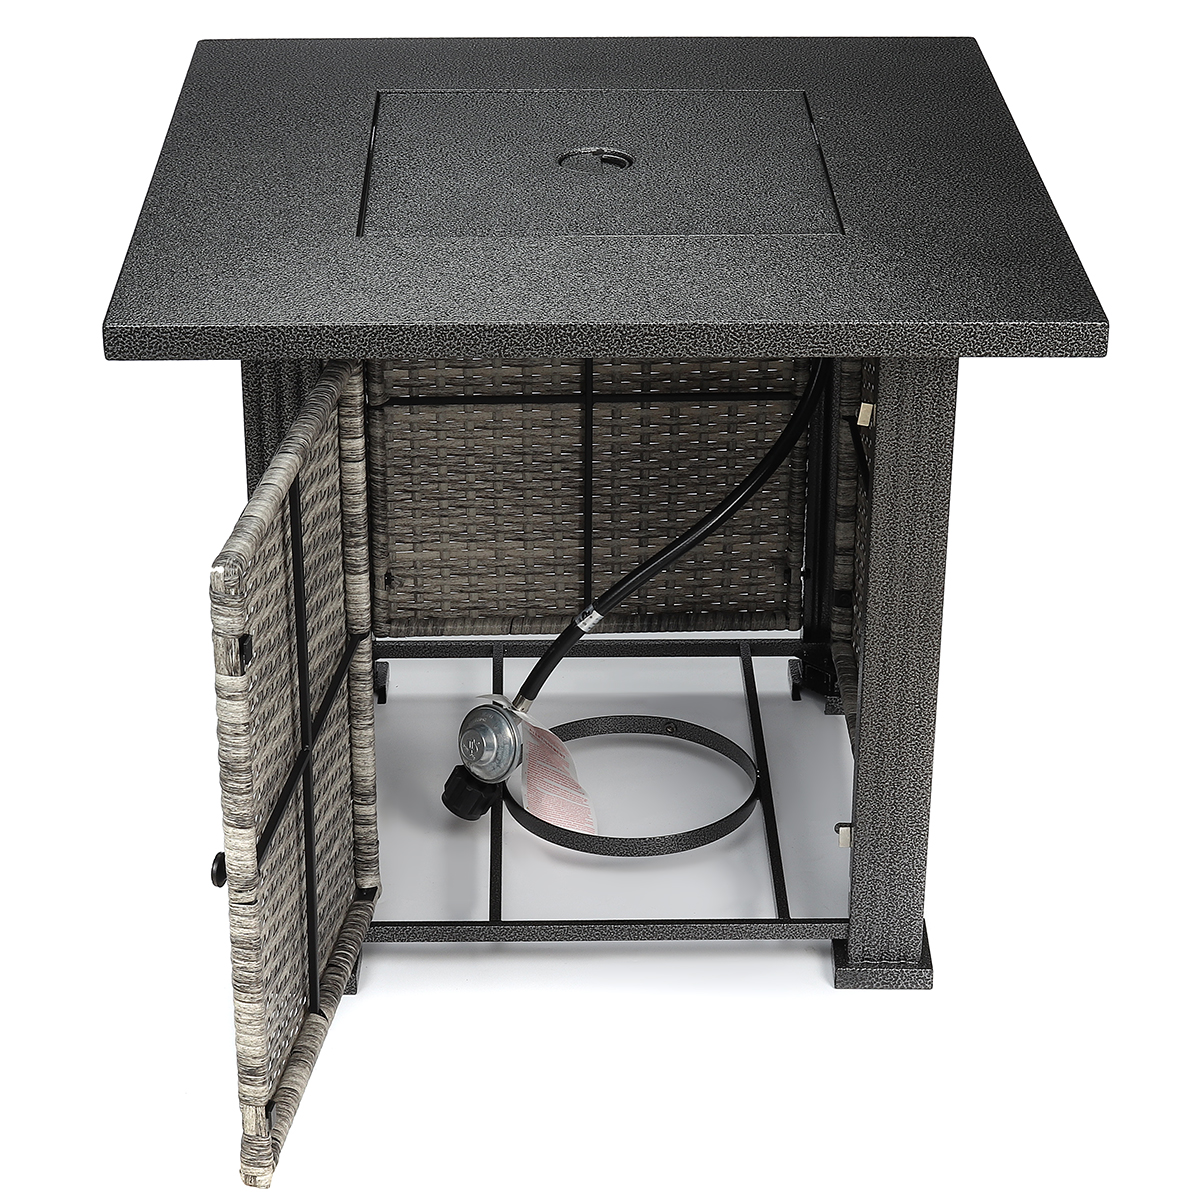 Square-Outdoor-Fireplace-Propane-Fire-Pit-Patio-Gas-Camping-Table-Garden-Burner-1924985-12